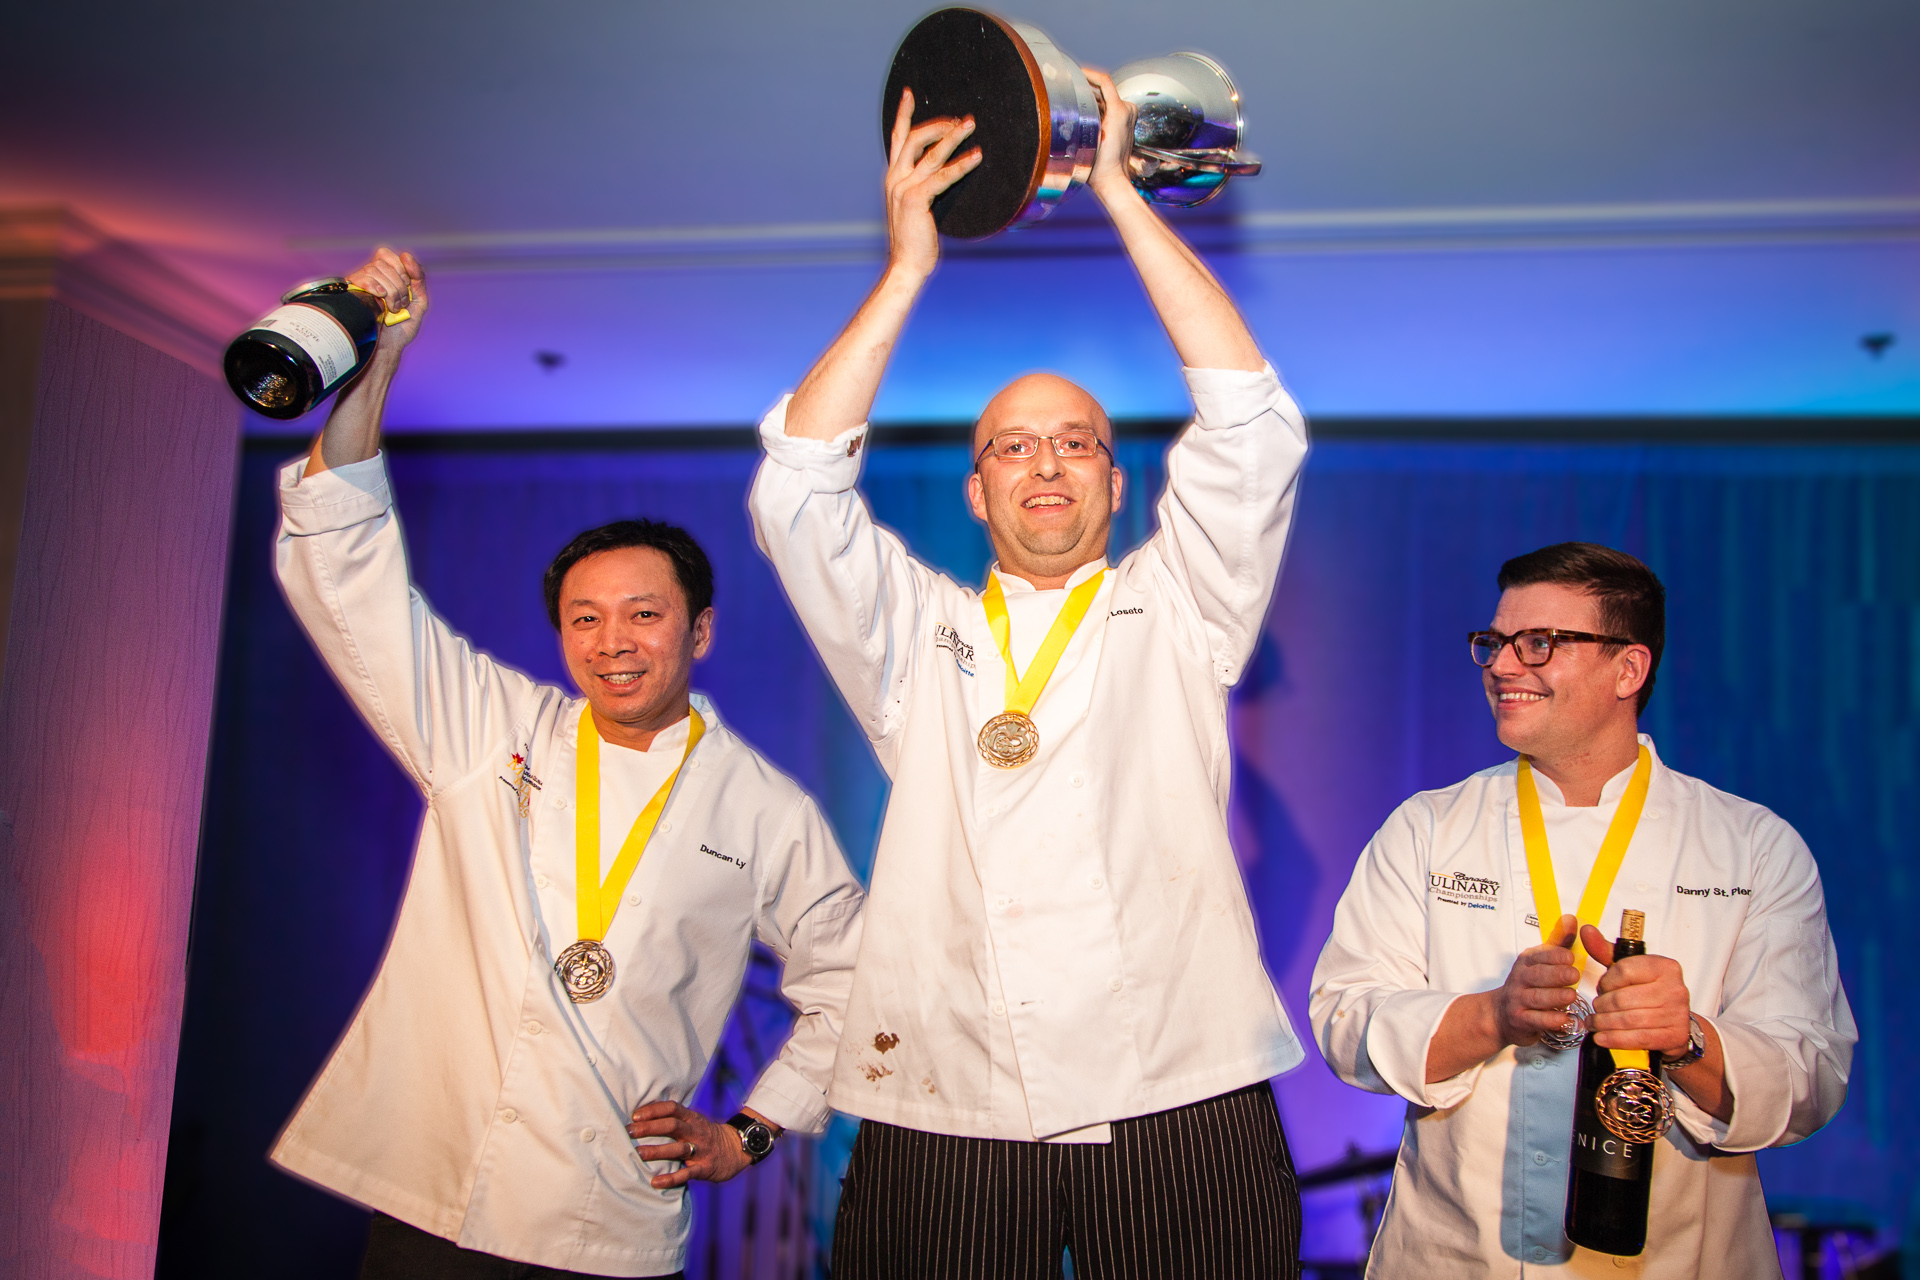 Le Patron interviews Chef Lorenzo Loseto on becoming Canada’s 2014 Gold Medal Plates Champion